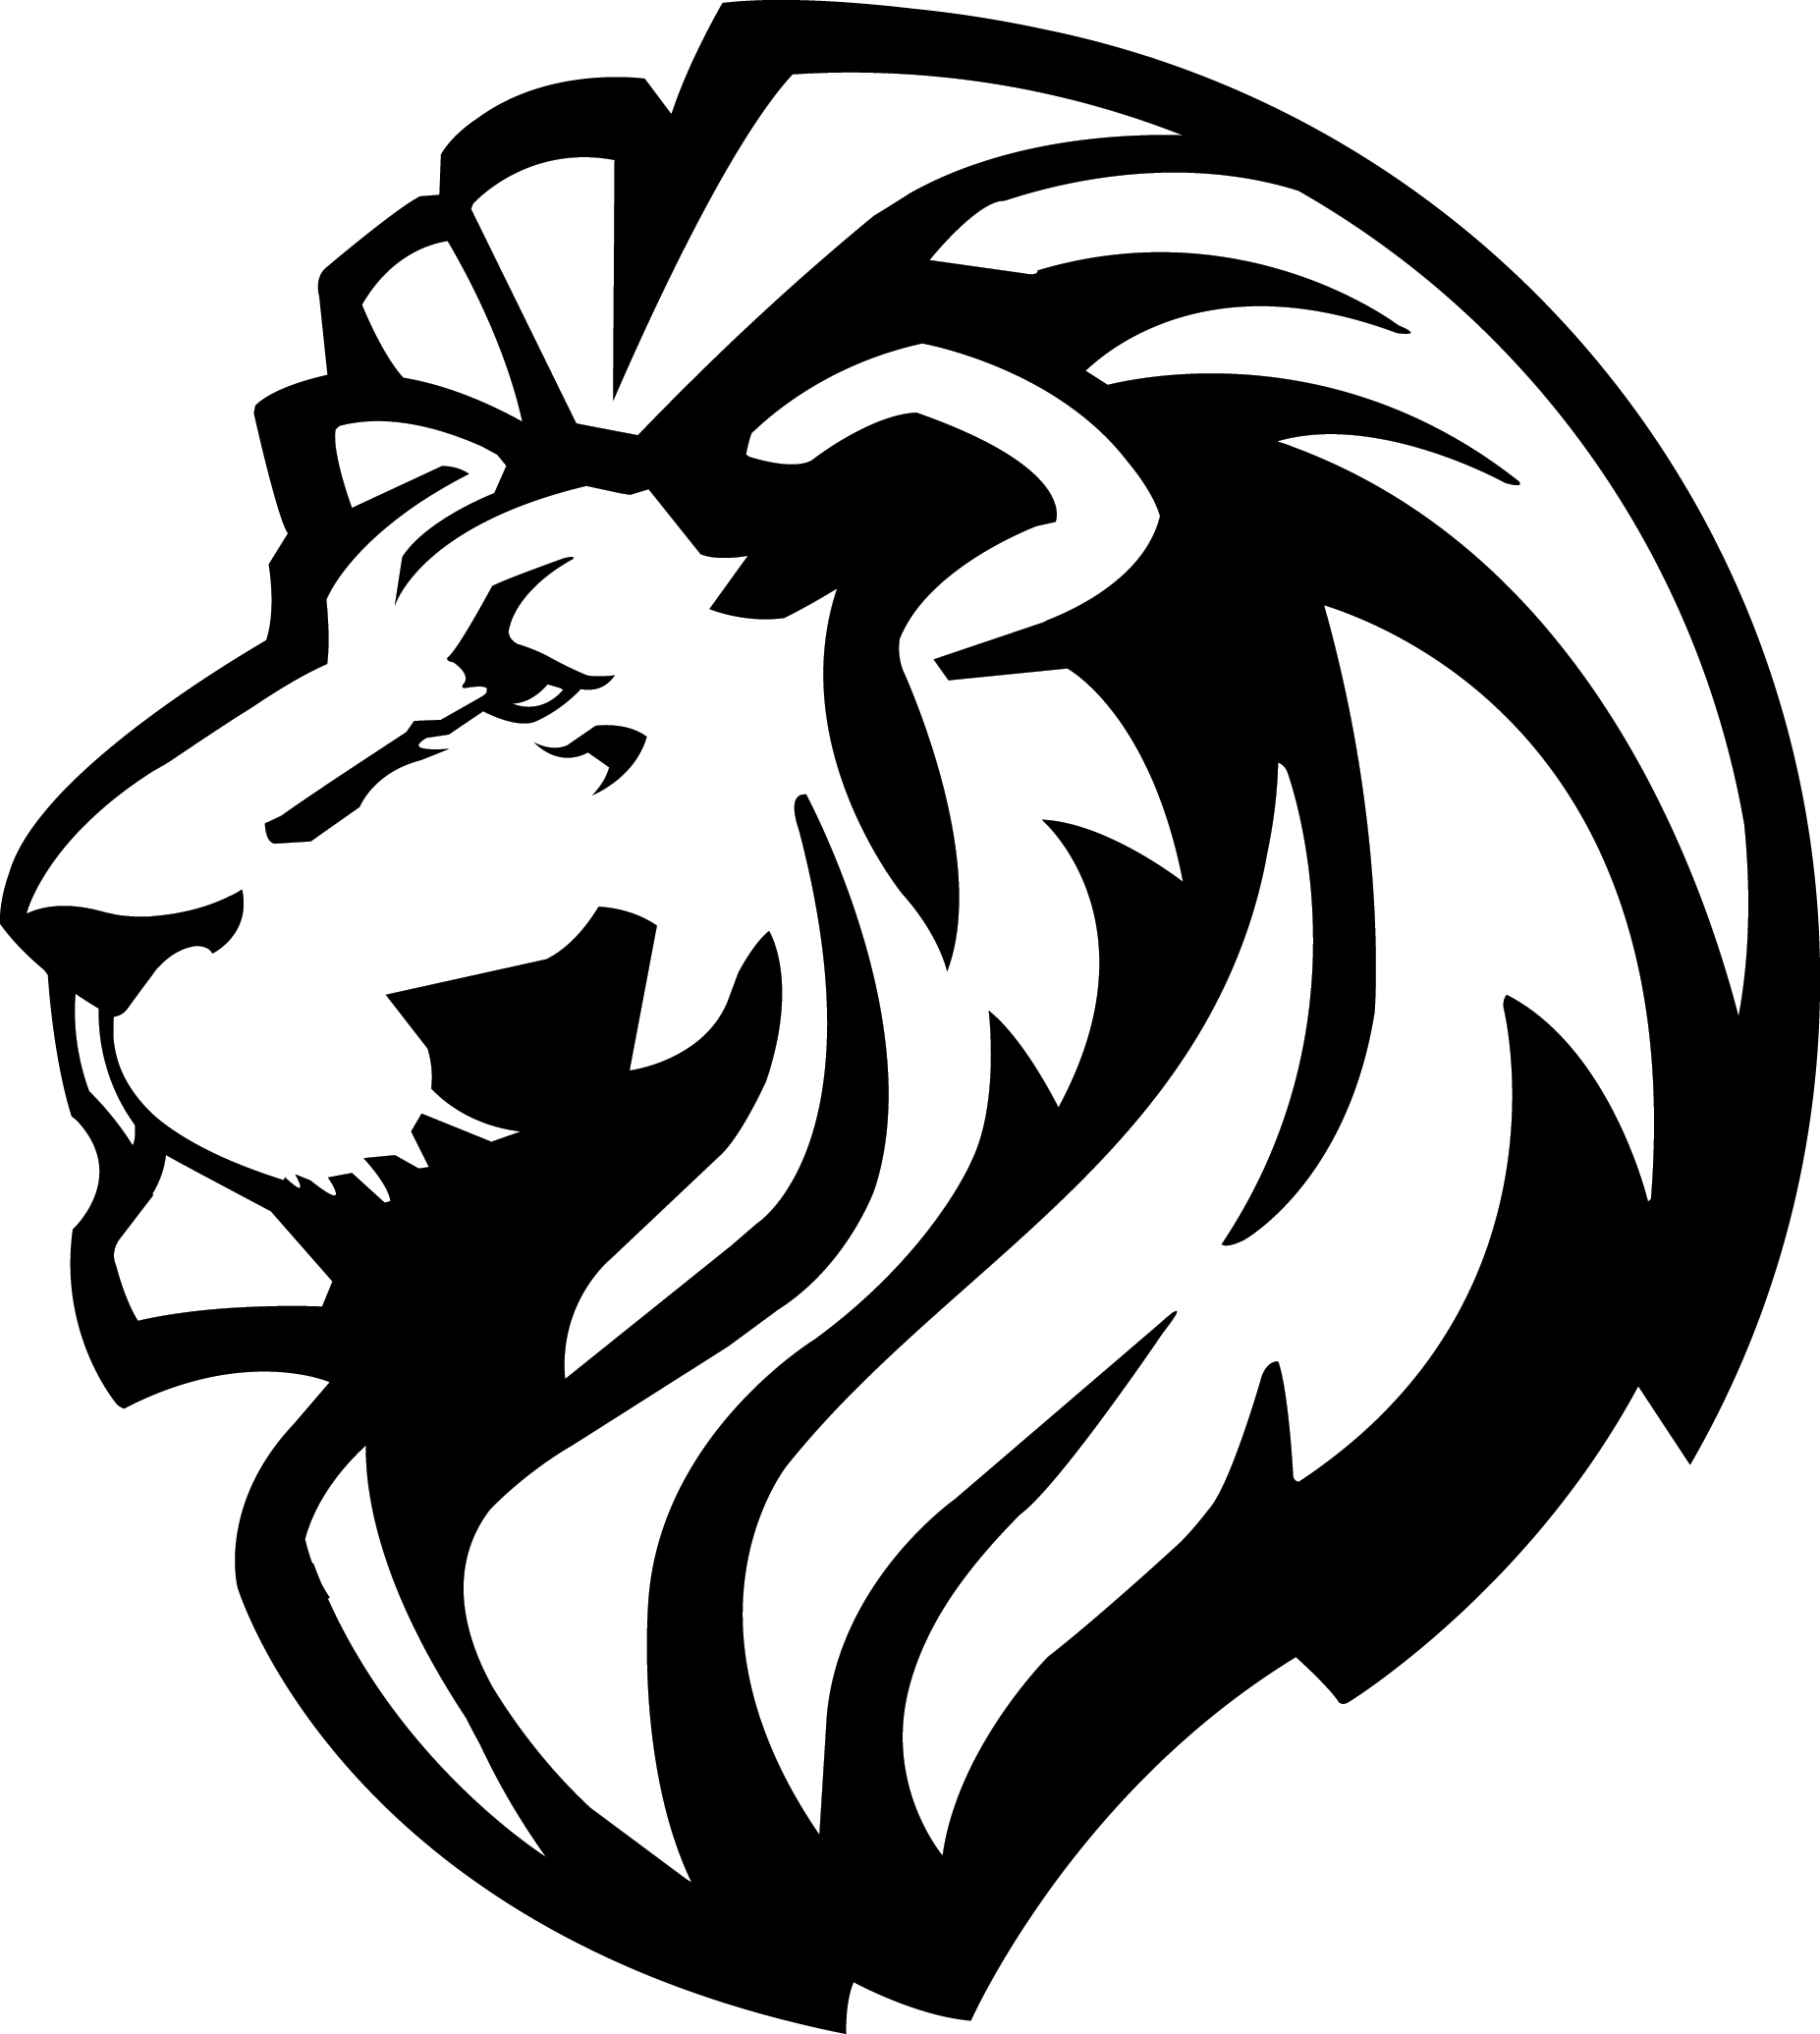 Lion School Logo - Lizemore Elementary School – Home of the Lions